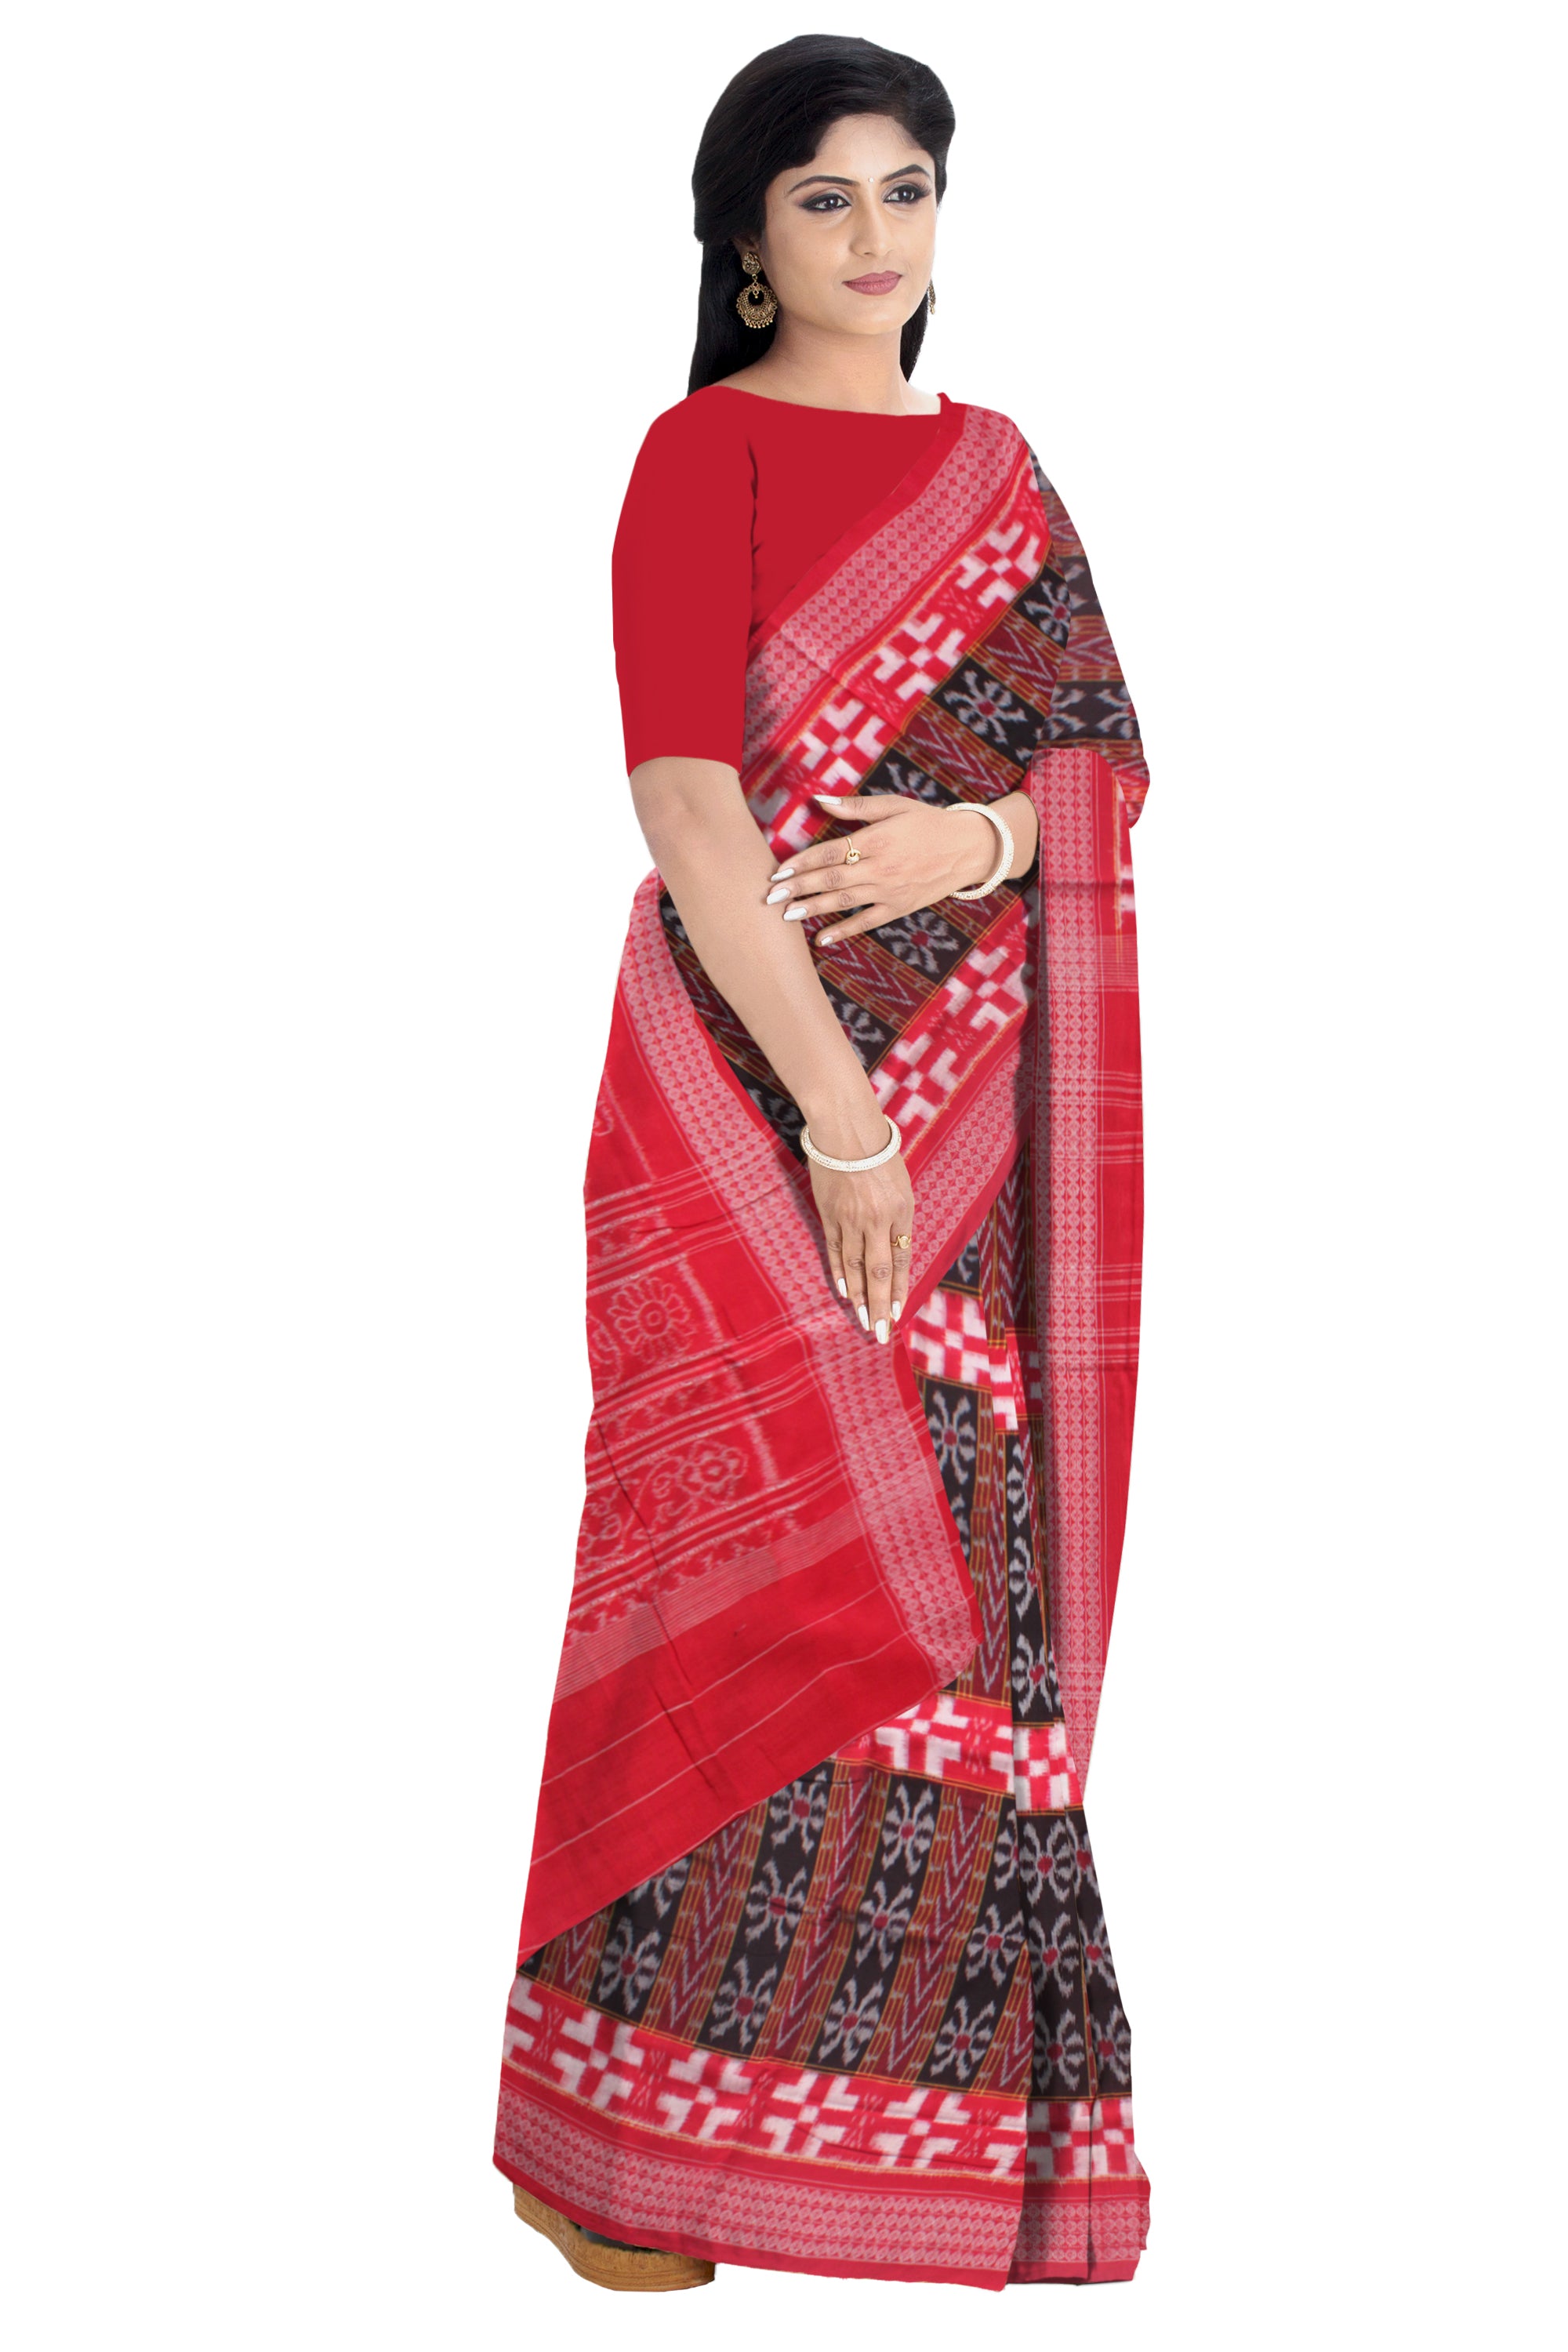 IKAT PATTERN PURE COTTON SAREE IS COFFEE AND RED COLOR BASE,WITH OUT BLOUSE PIECE. - Koshali Arts & Crafts Enterprise